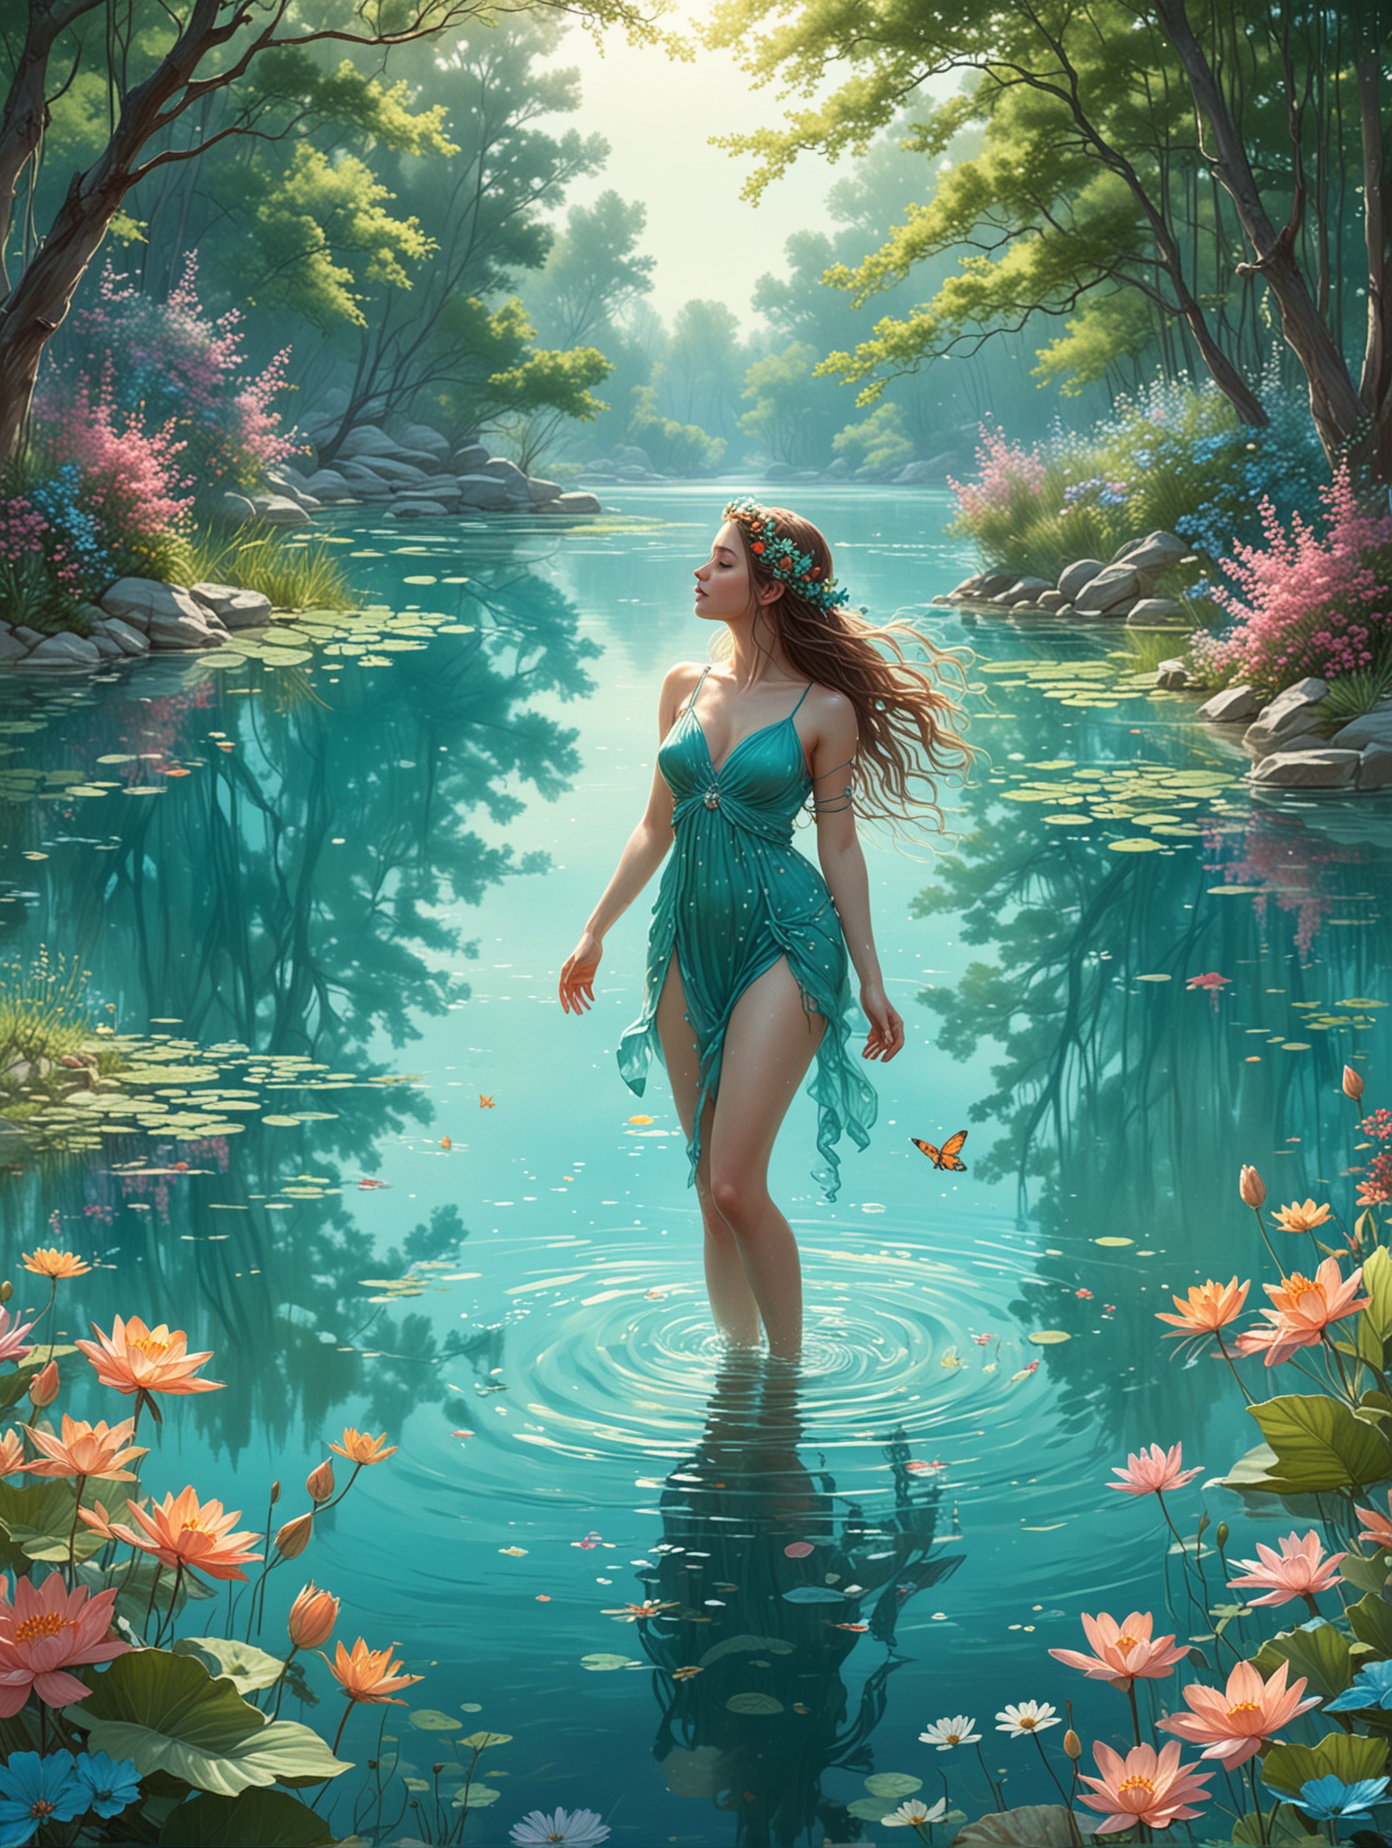 Illustration of a beautiful nymph, bright turquoise lake, trees, flowers